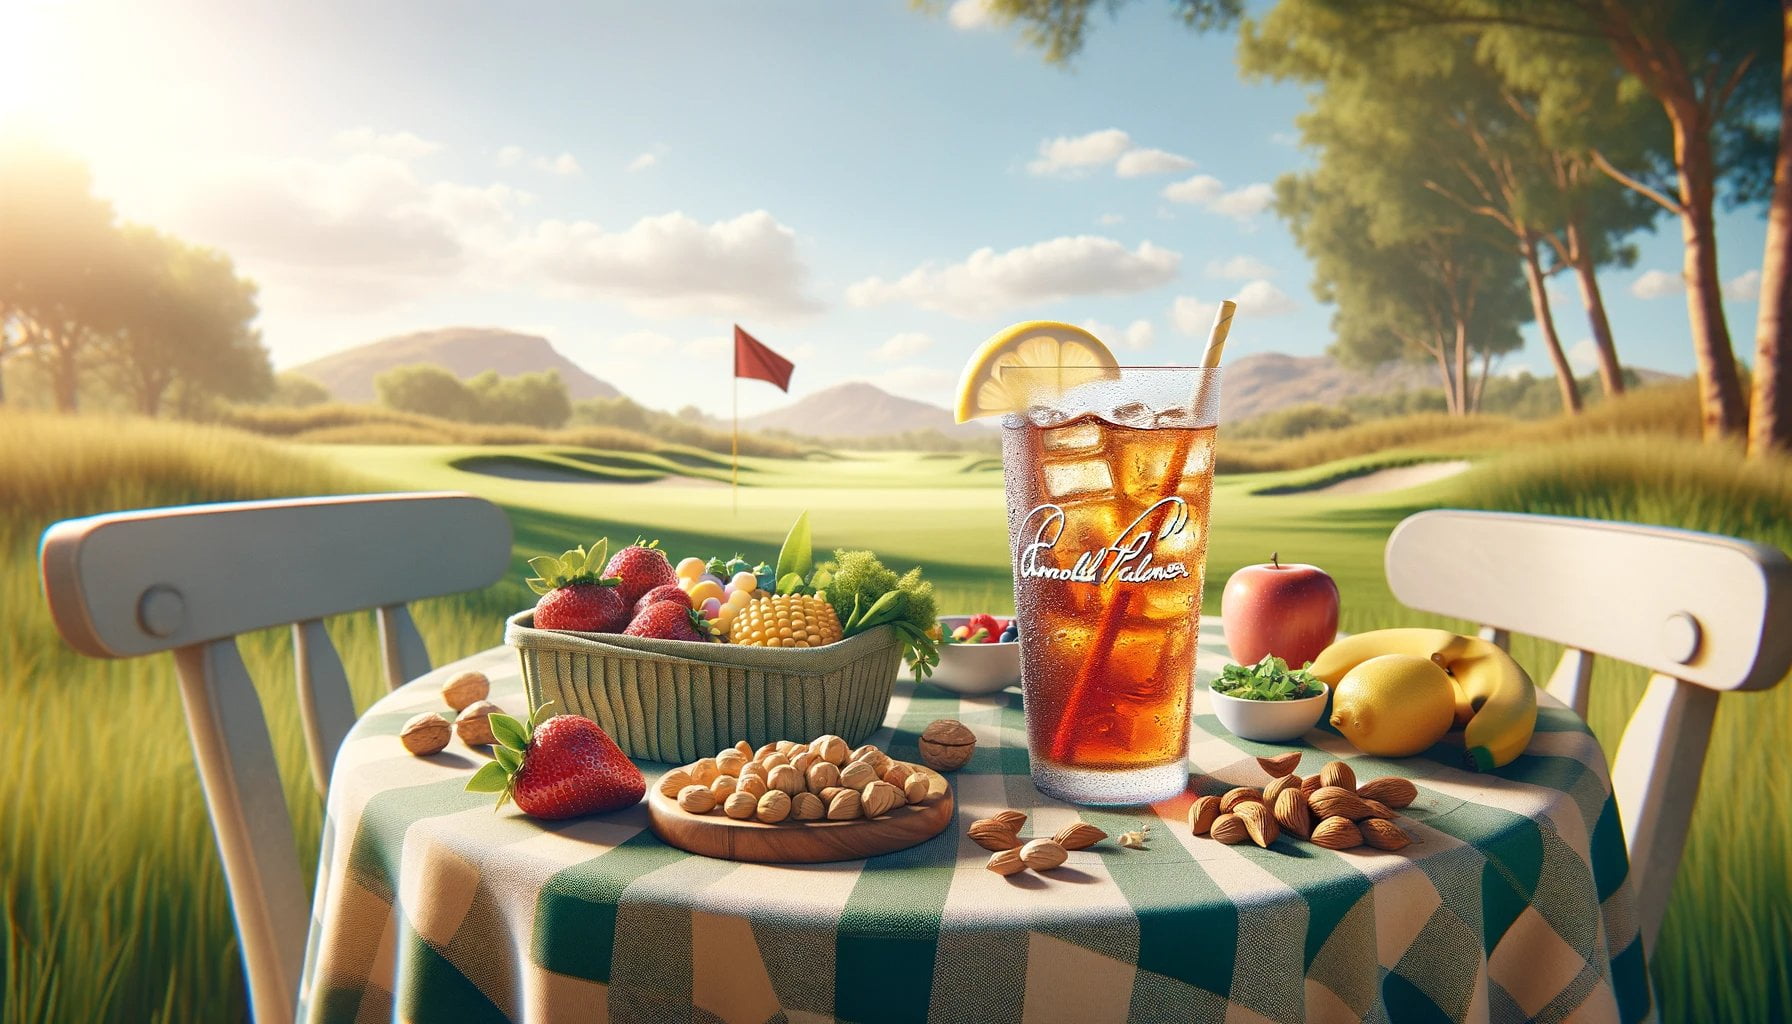 arnold palmer spiked nutrition facts